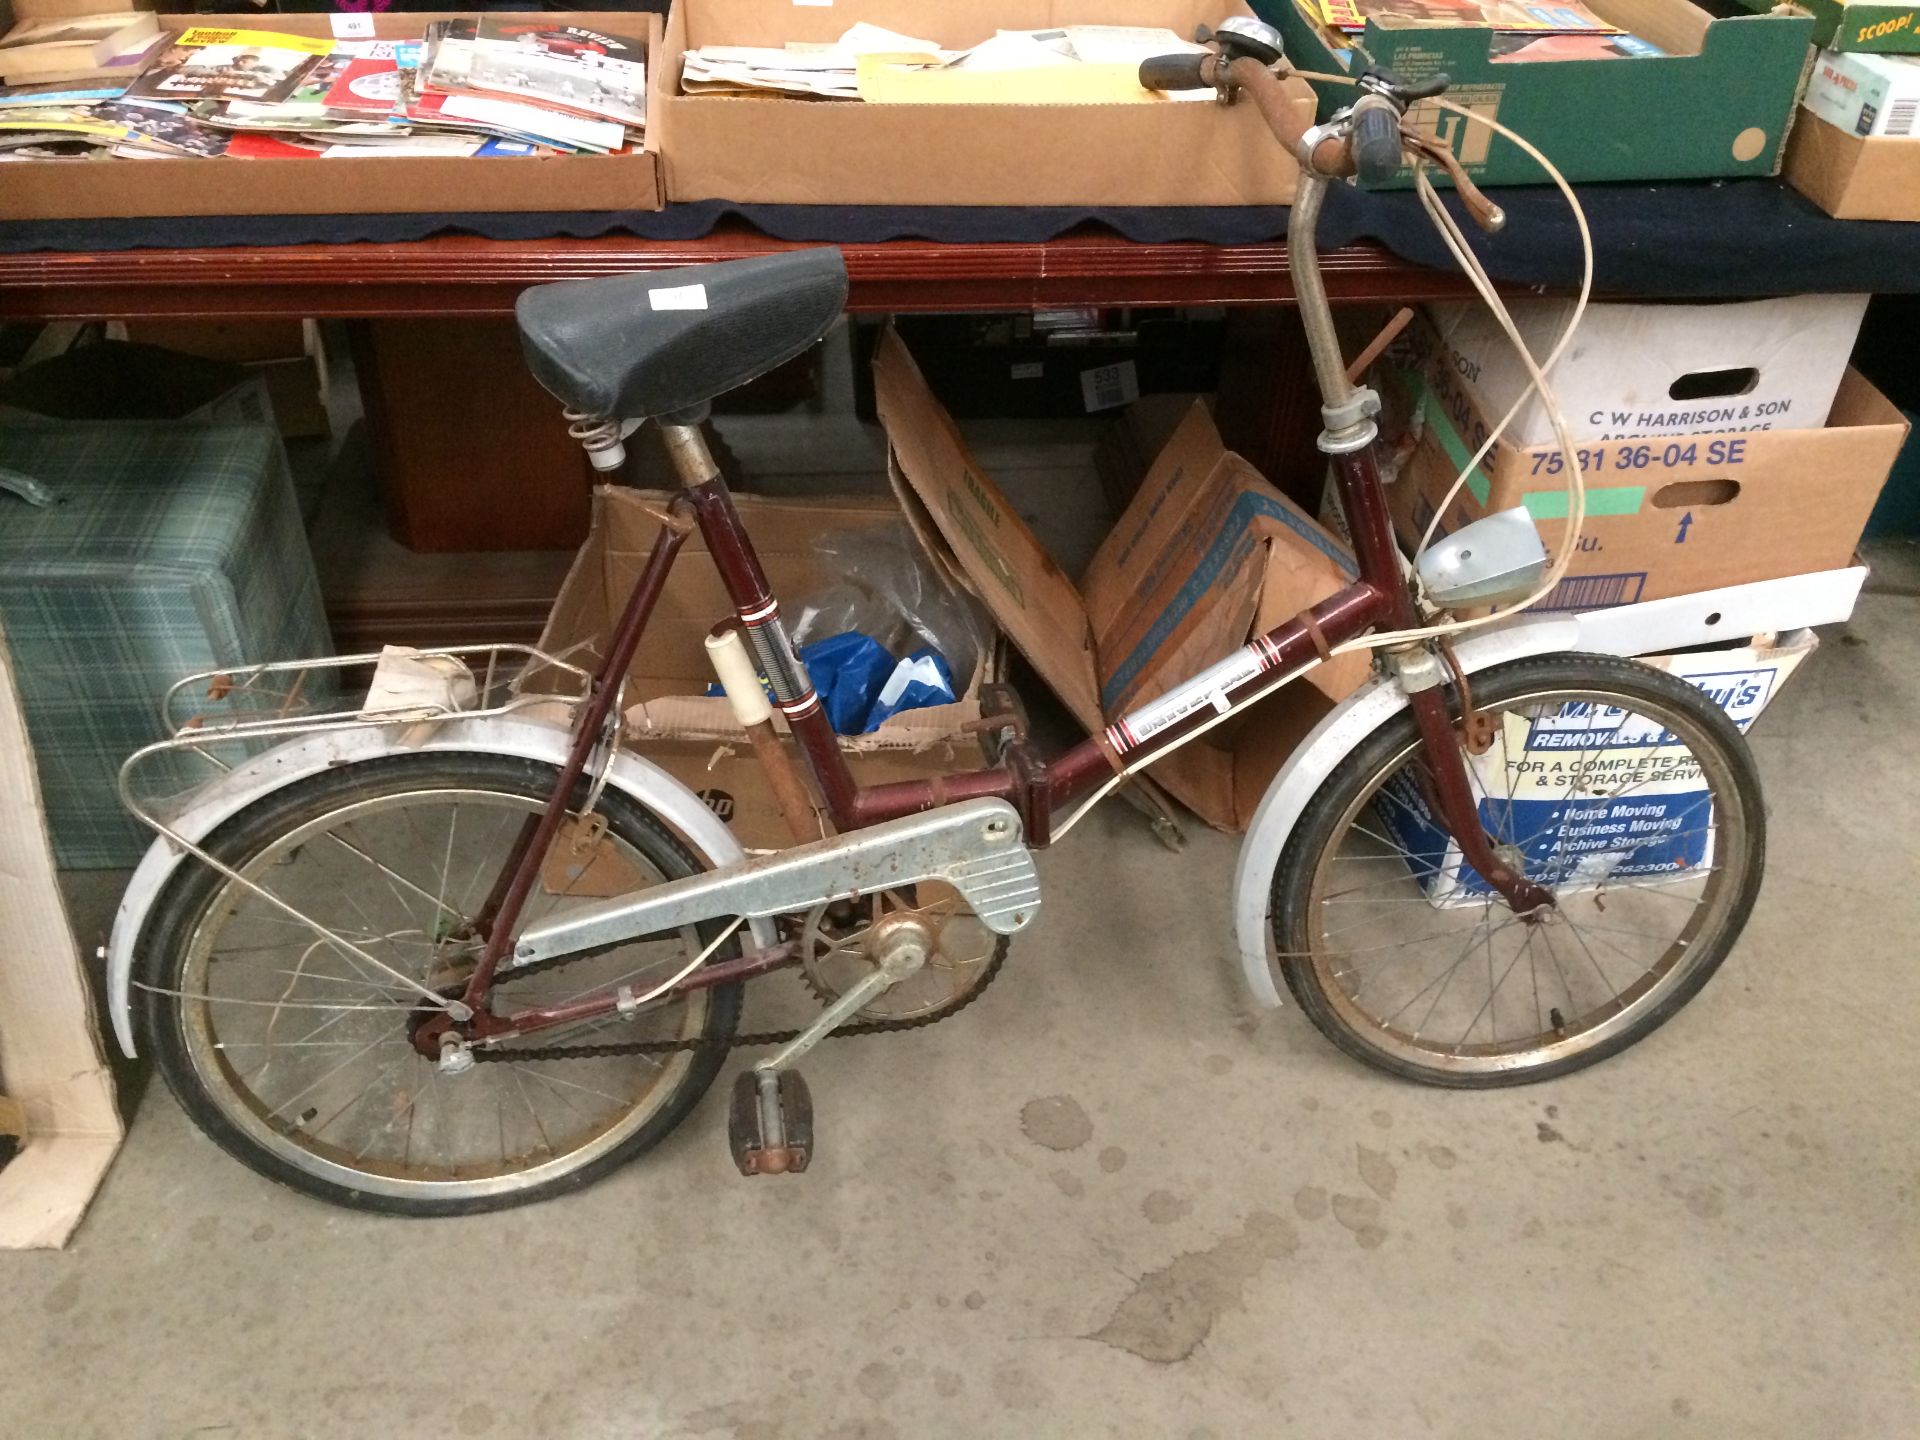 A vintage Universal folding bicycle